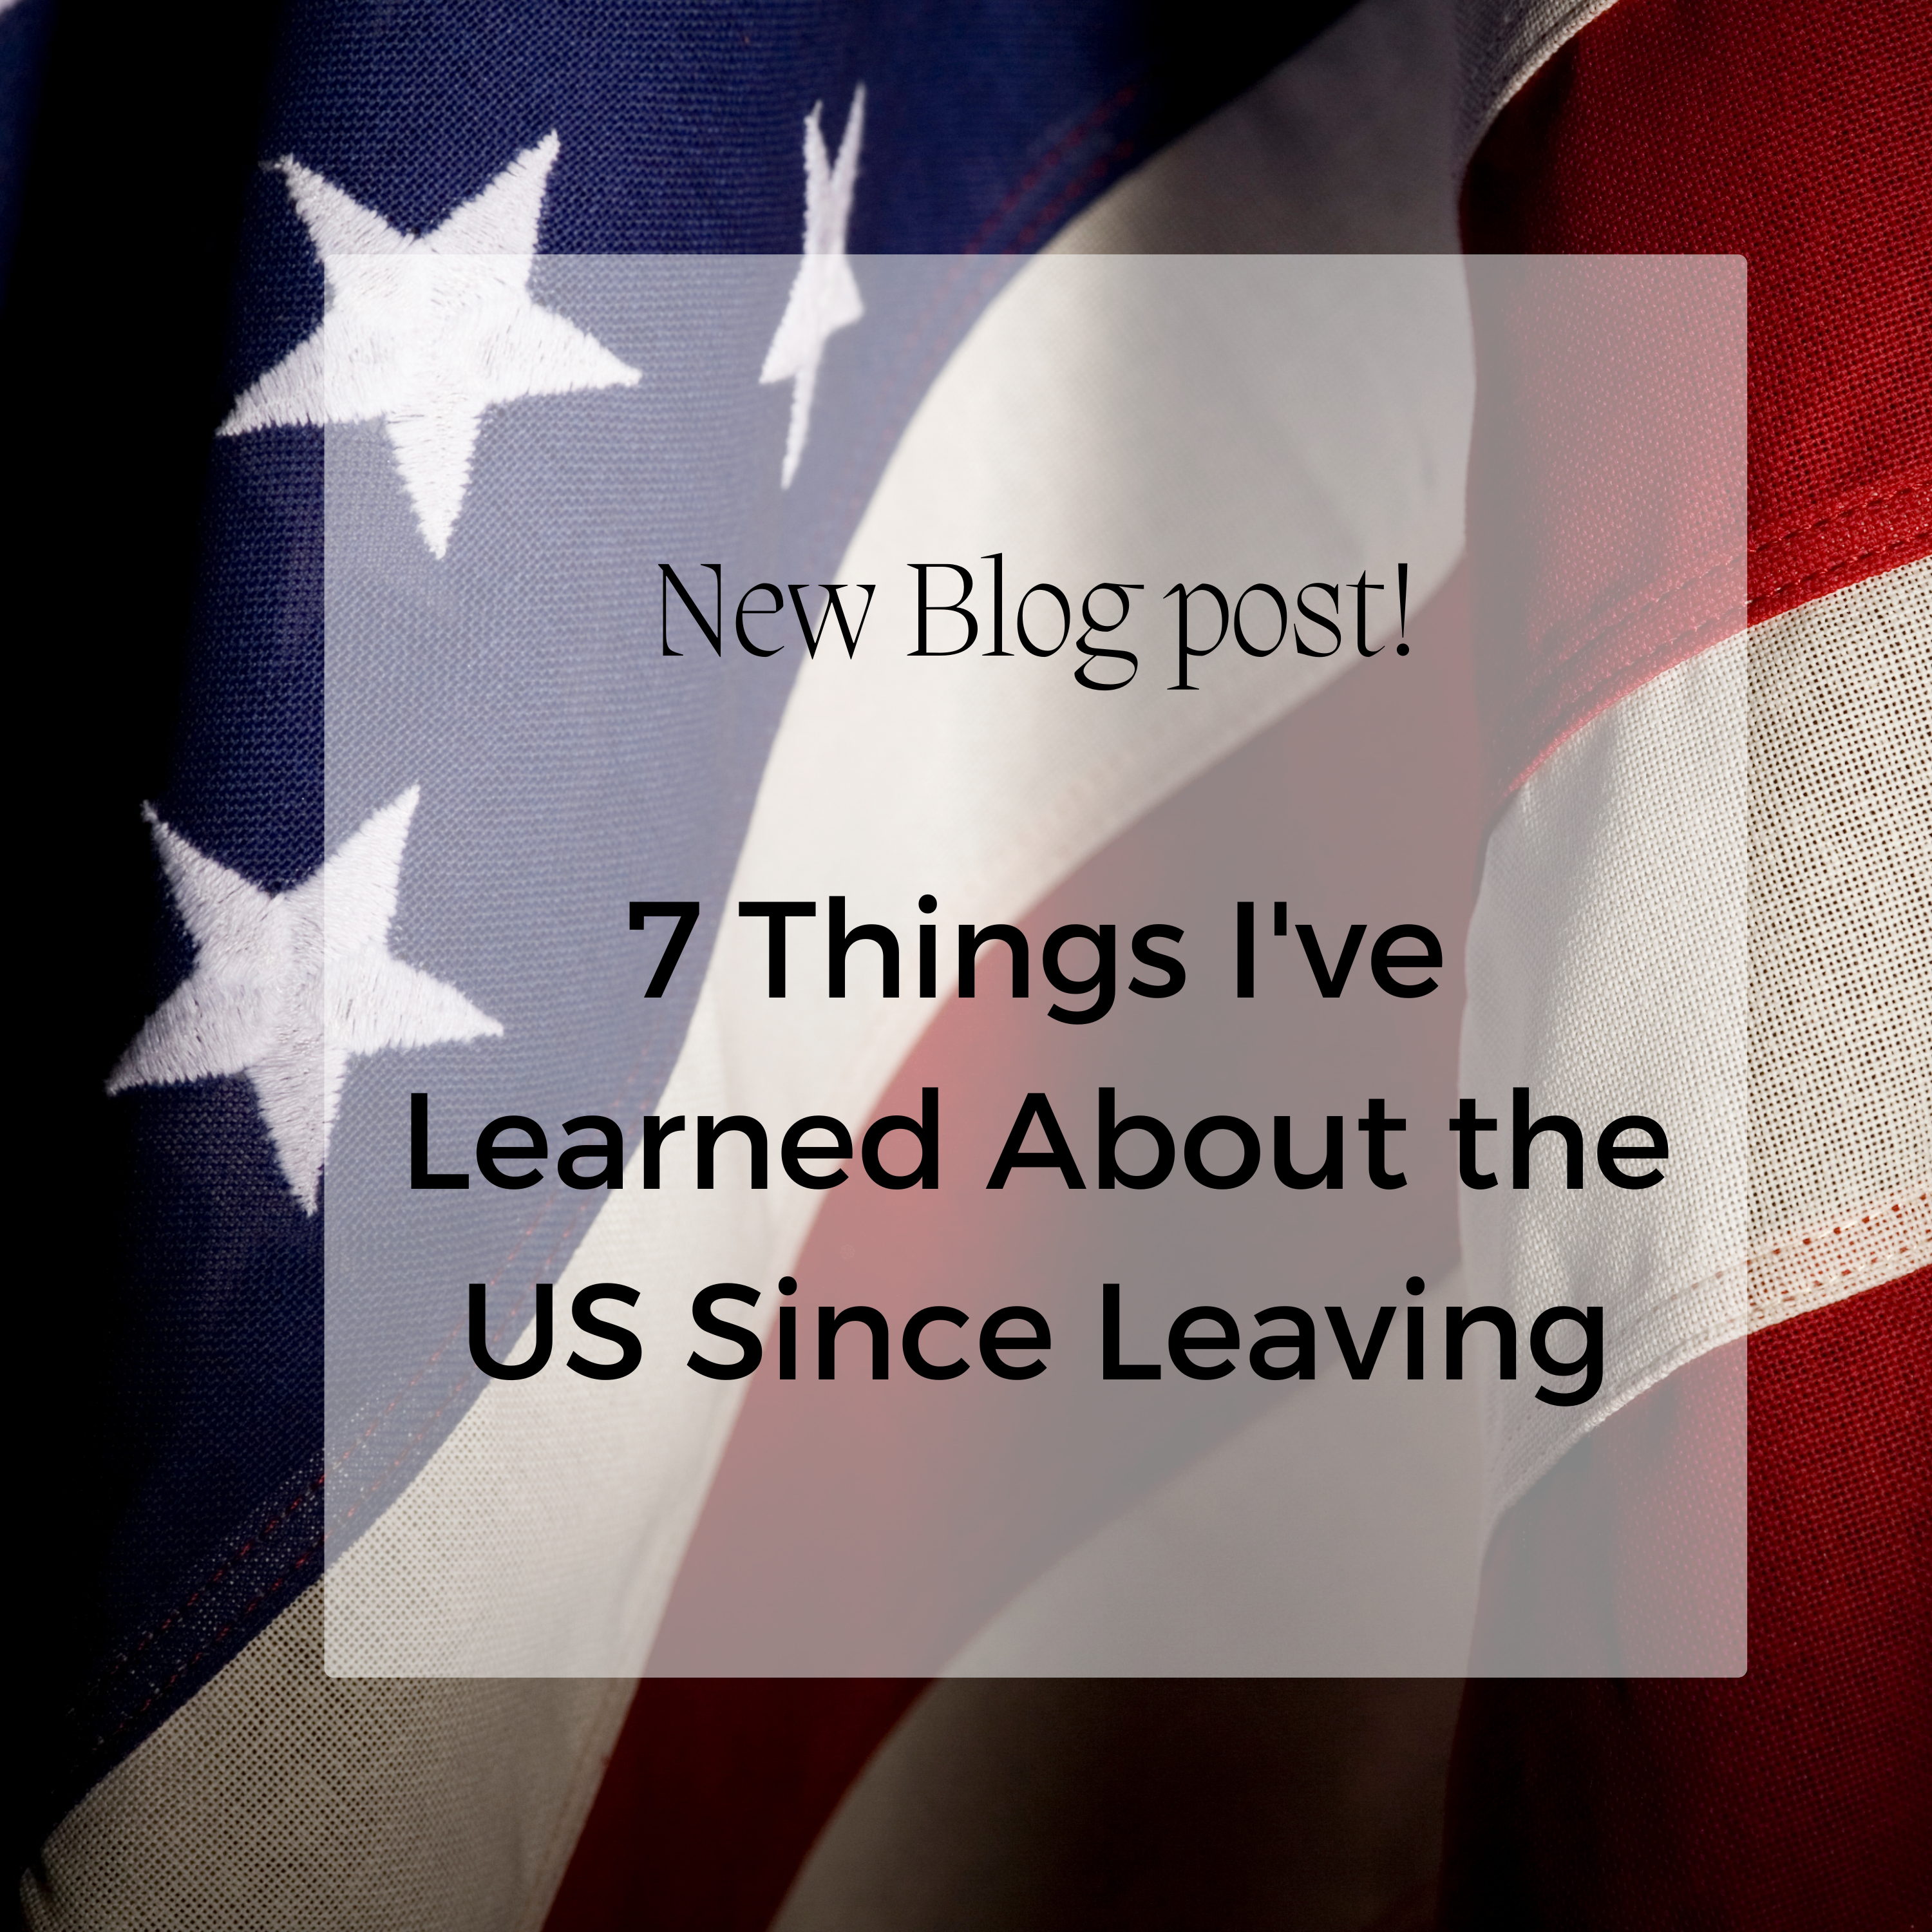 7 things ive learned about the US since leaving